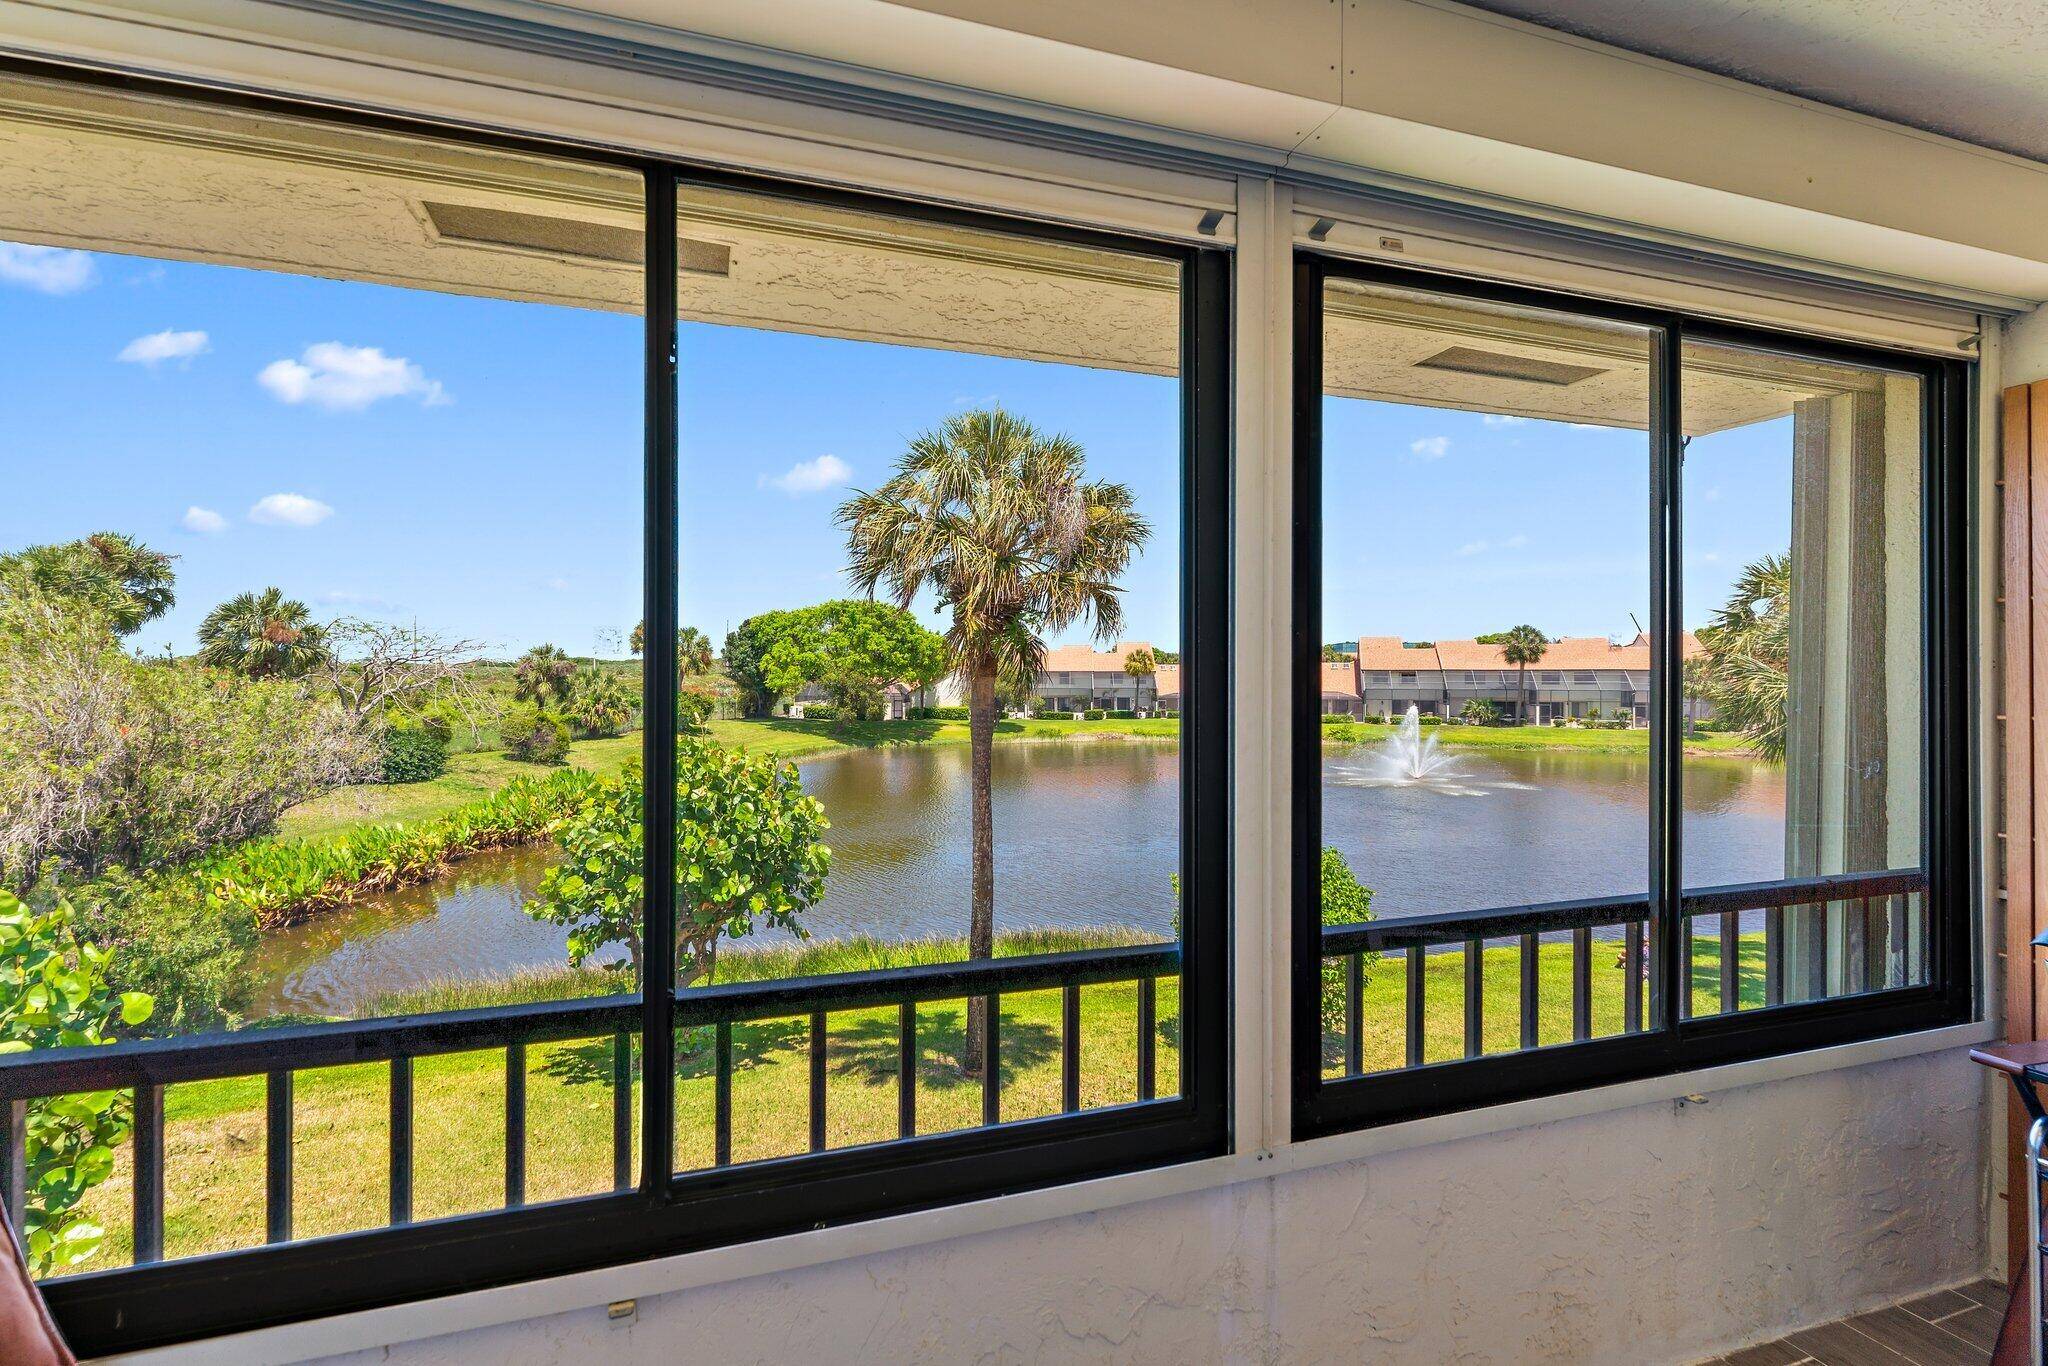 This beautiful lakefront rental in the heart of Juno Beach is featuring 2 bedrooms, 2 bathrooms, a one car garage.